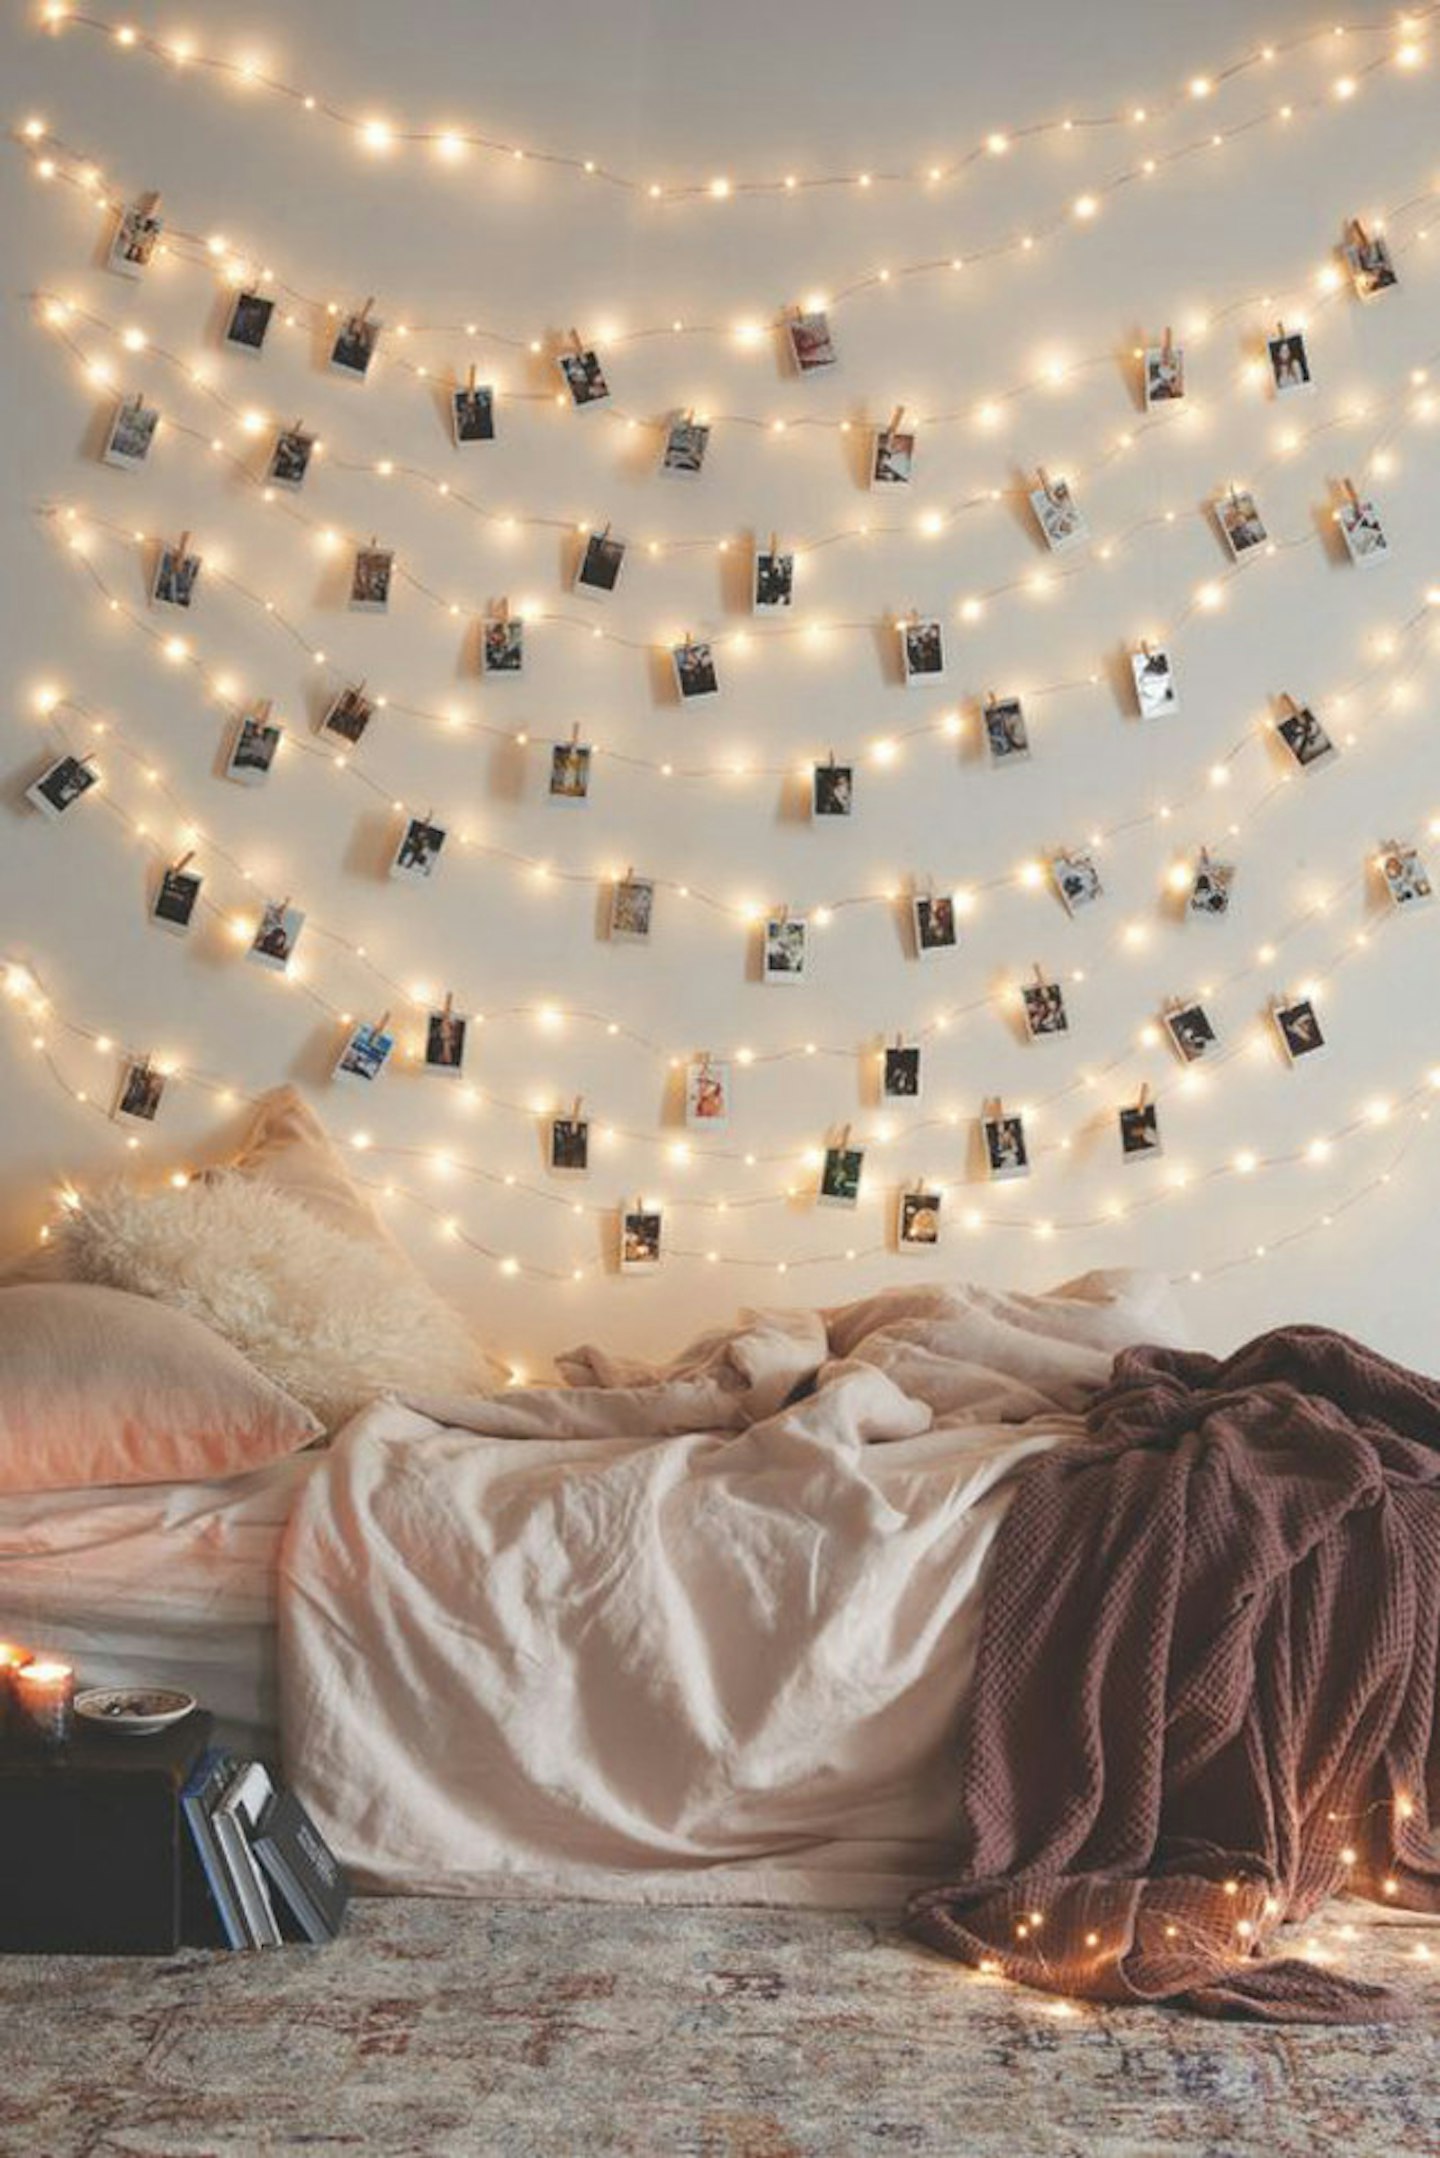 7 Magical Things You Can Do With Fairy Lights